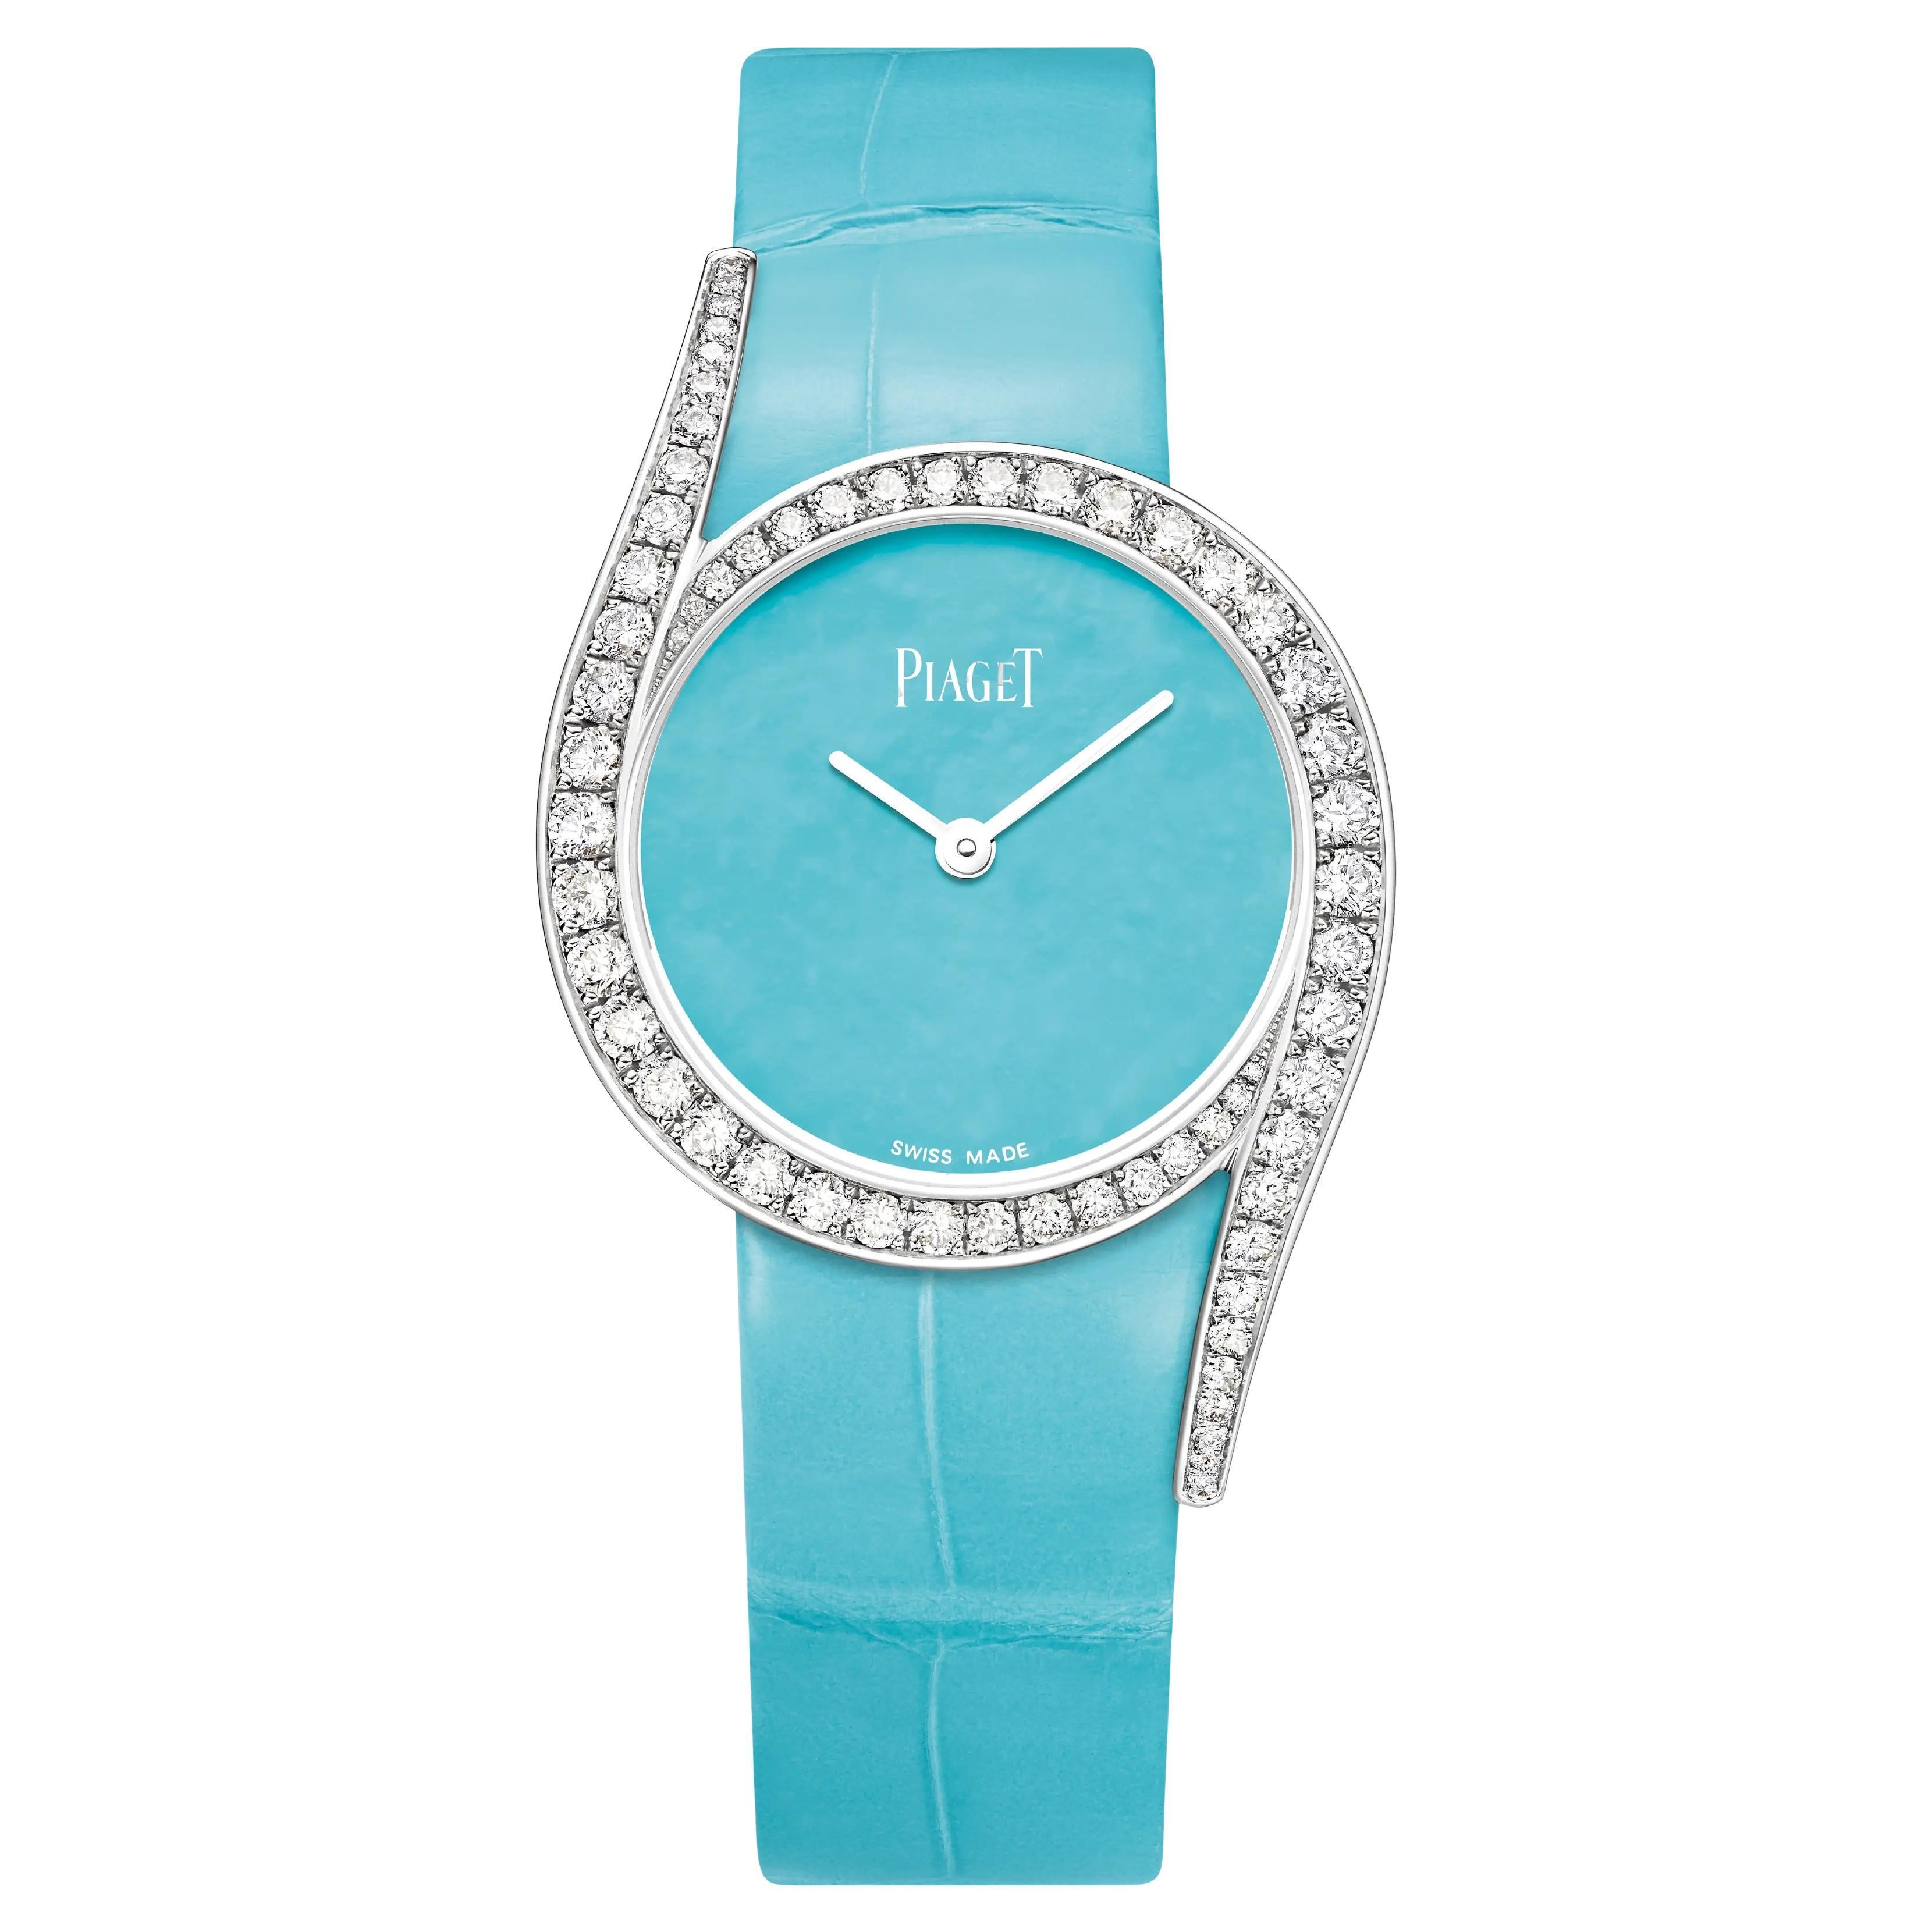 Piaget Limelight Gala Turquoise Dial Diamond Turquoise Leather Strap Watch G0A43